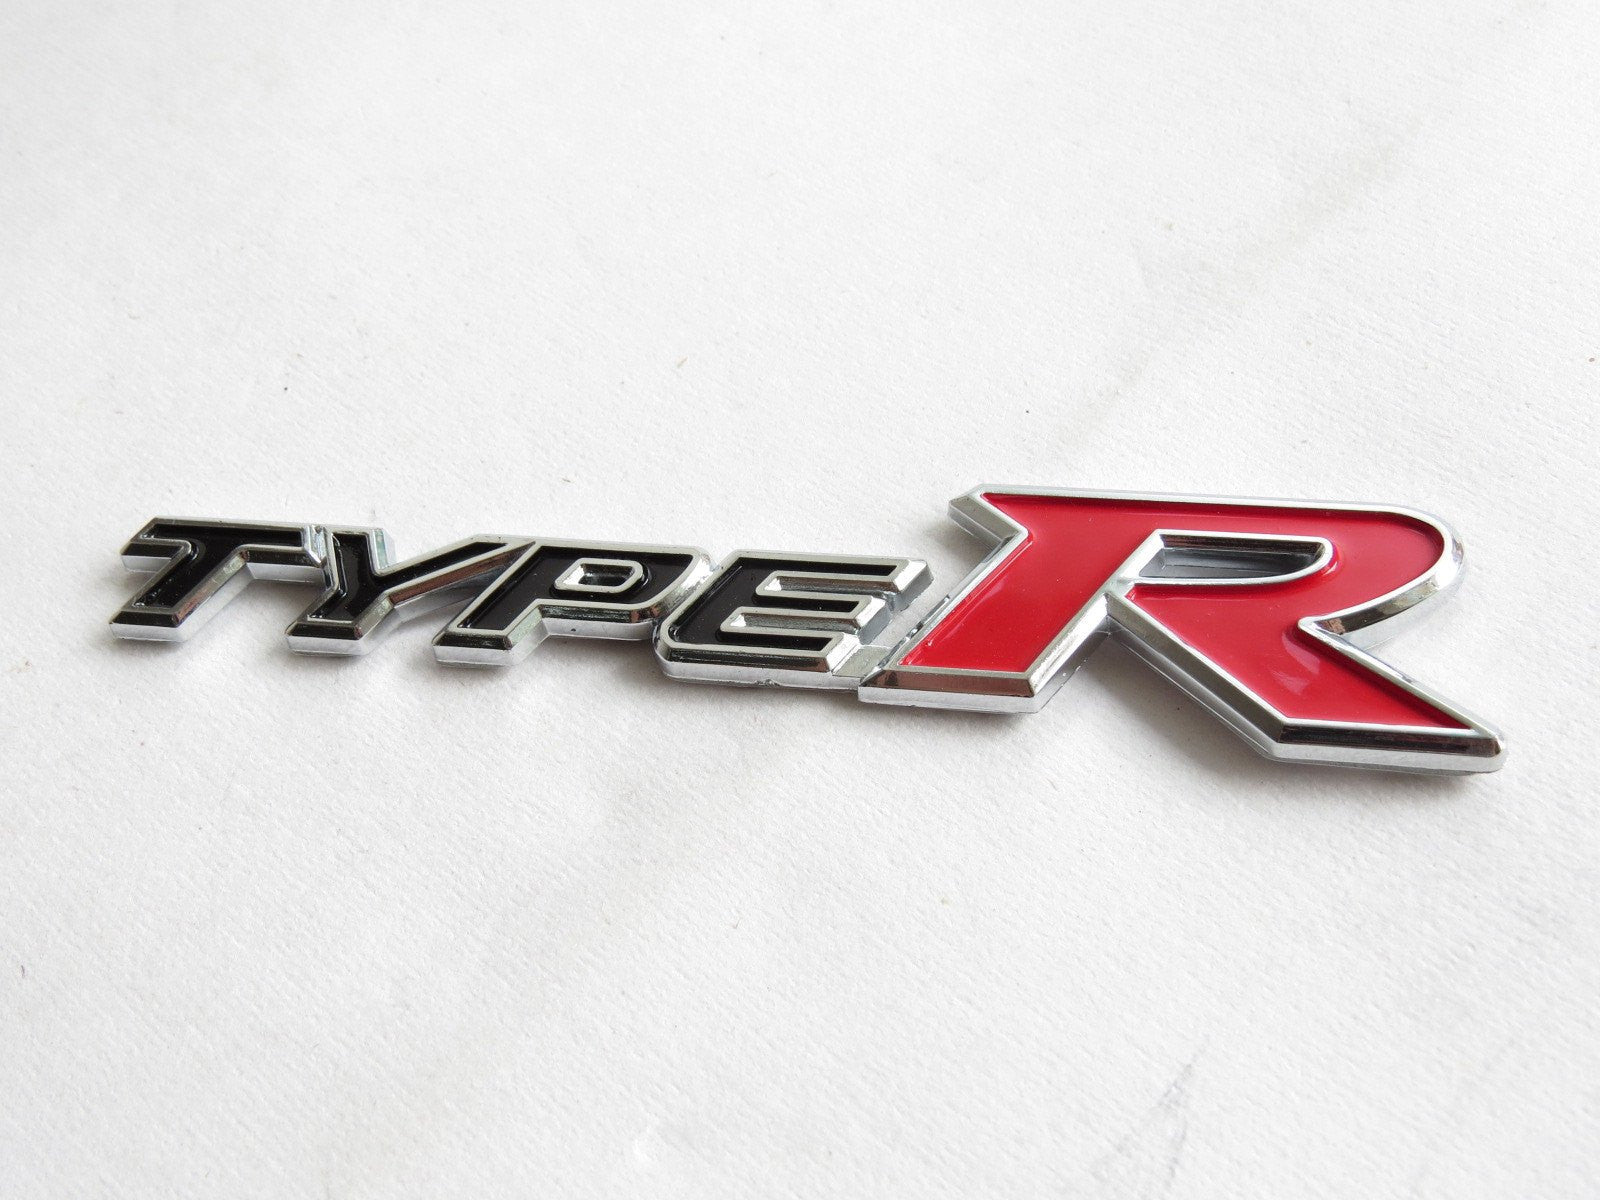 New Black & Red "TYPE-R" Chrome Plastic Emblem Badge for Honda - Pinalloy Online Auto Accessories Lightweight Car Kit 